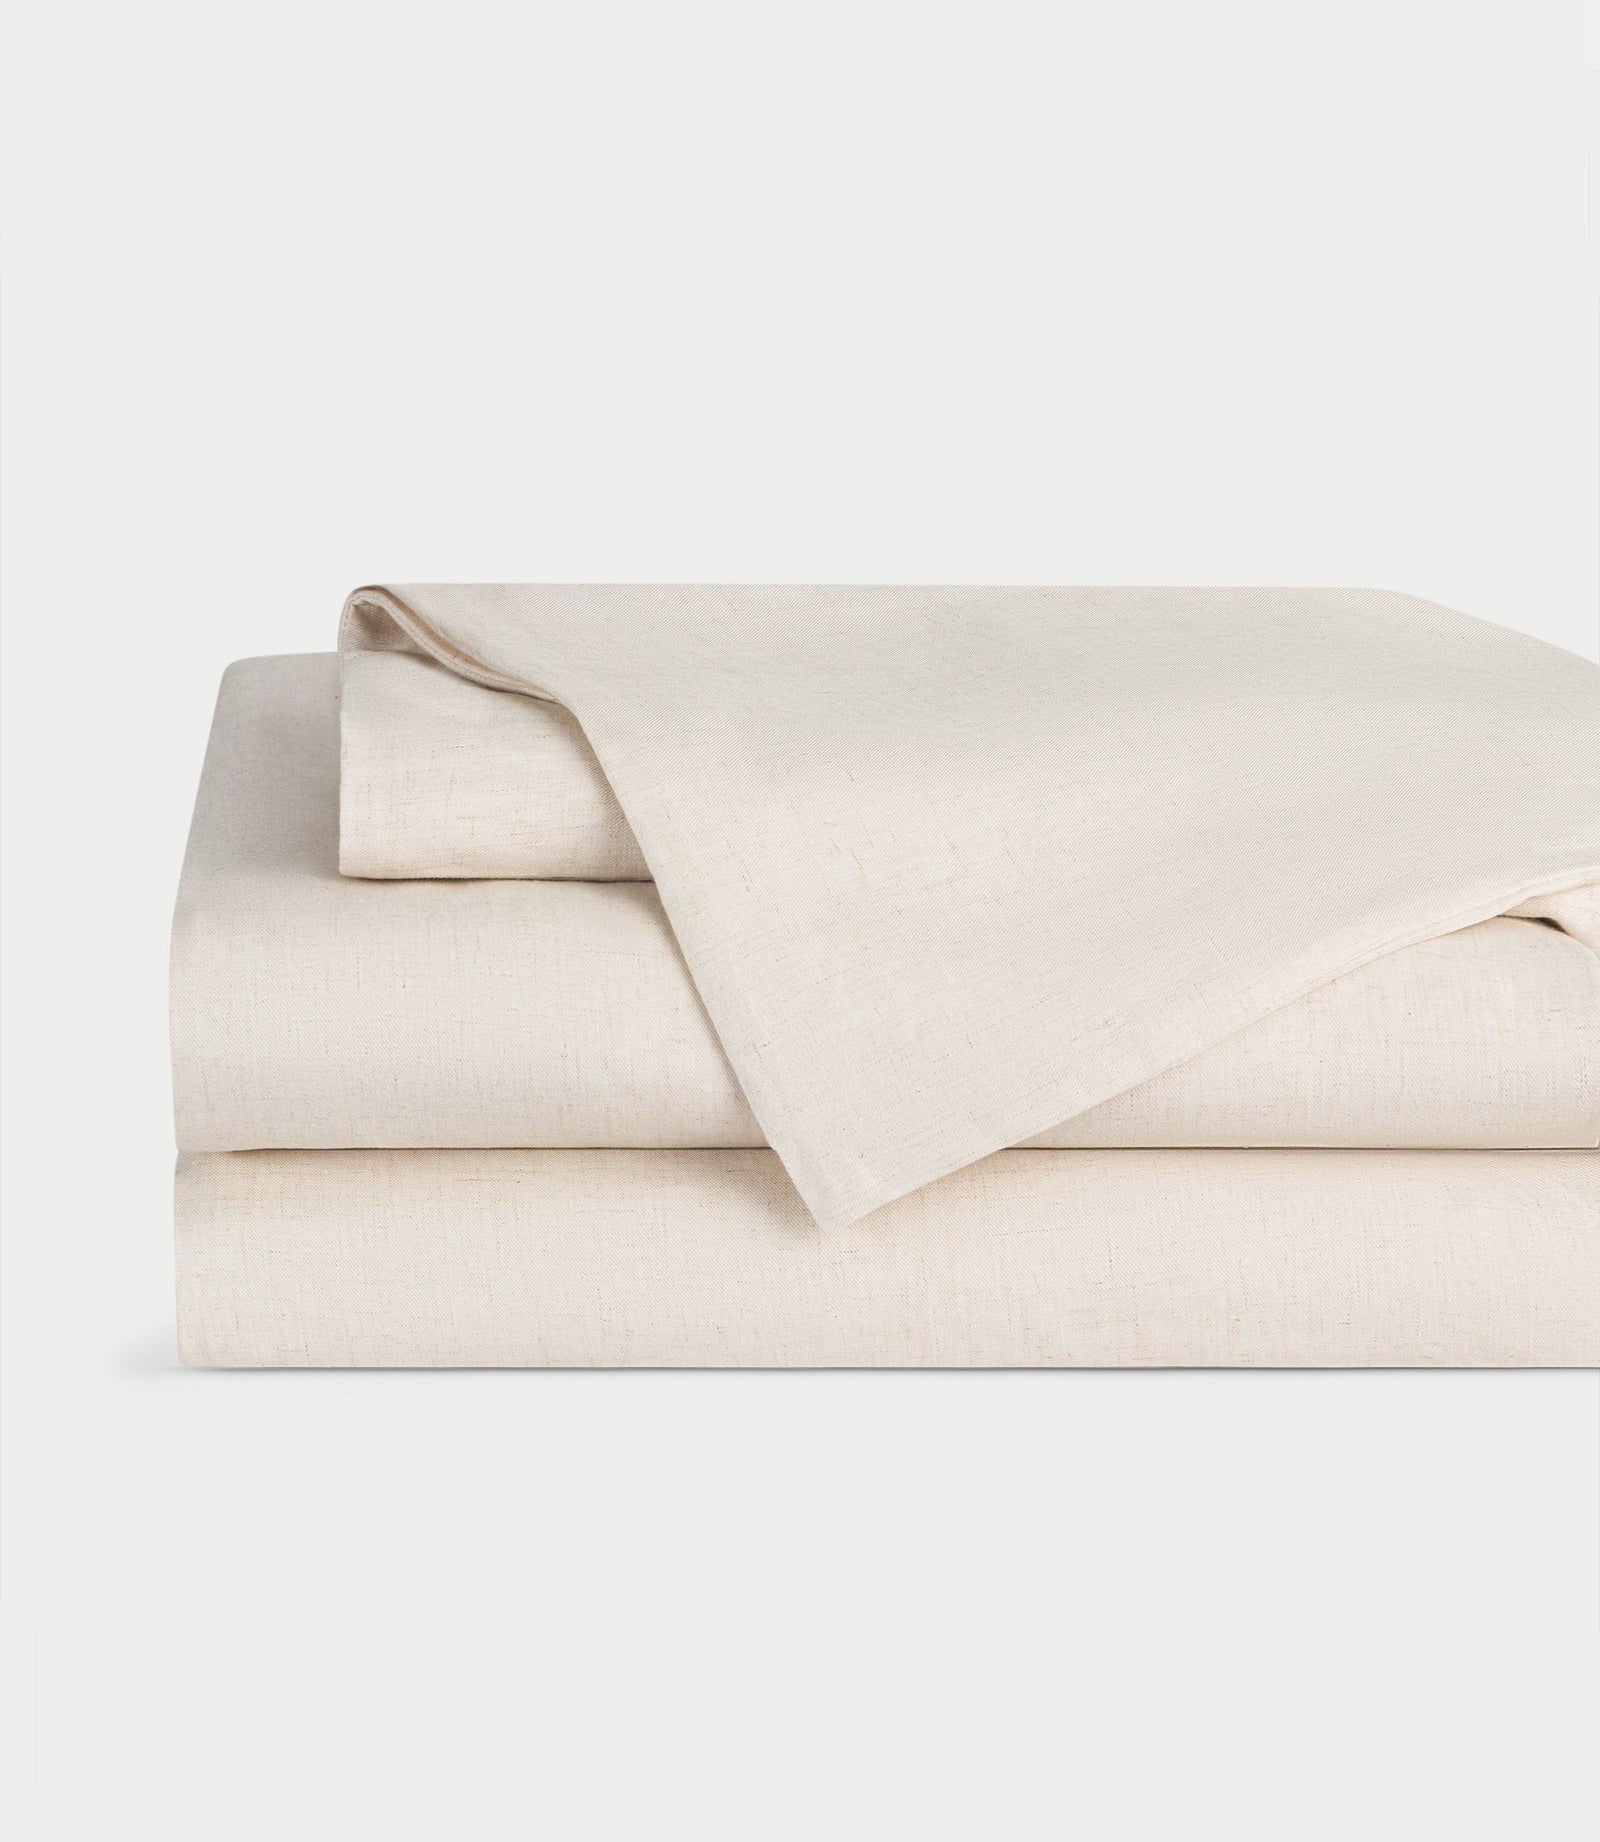 Natural Bamboo Linen Sheet Set neatly folded over a white background. 